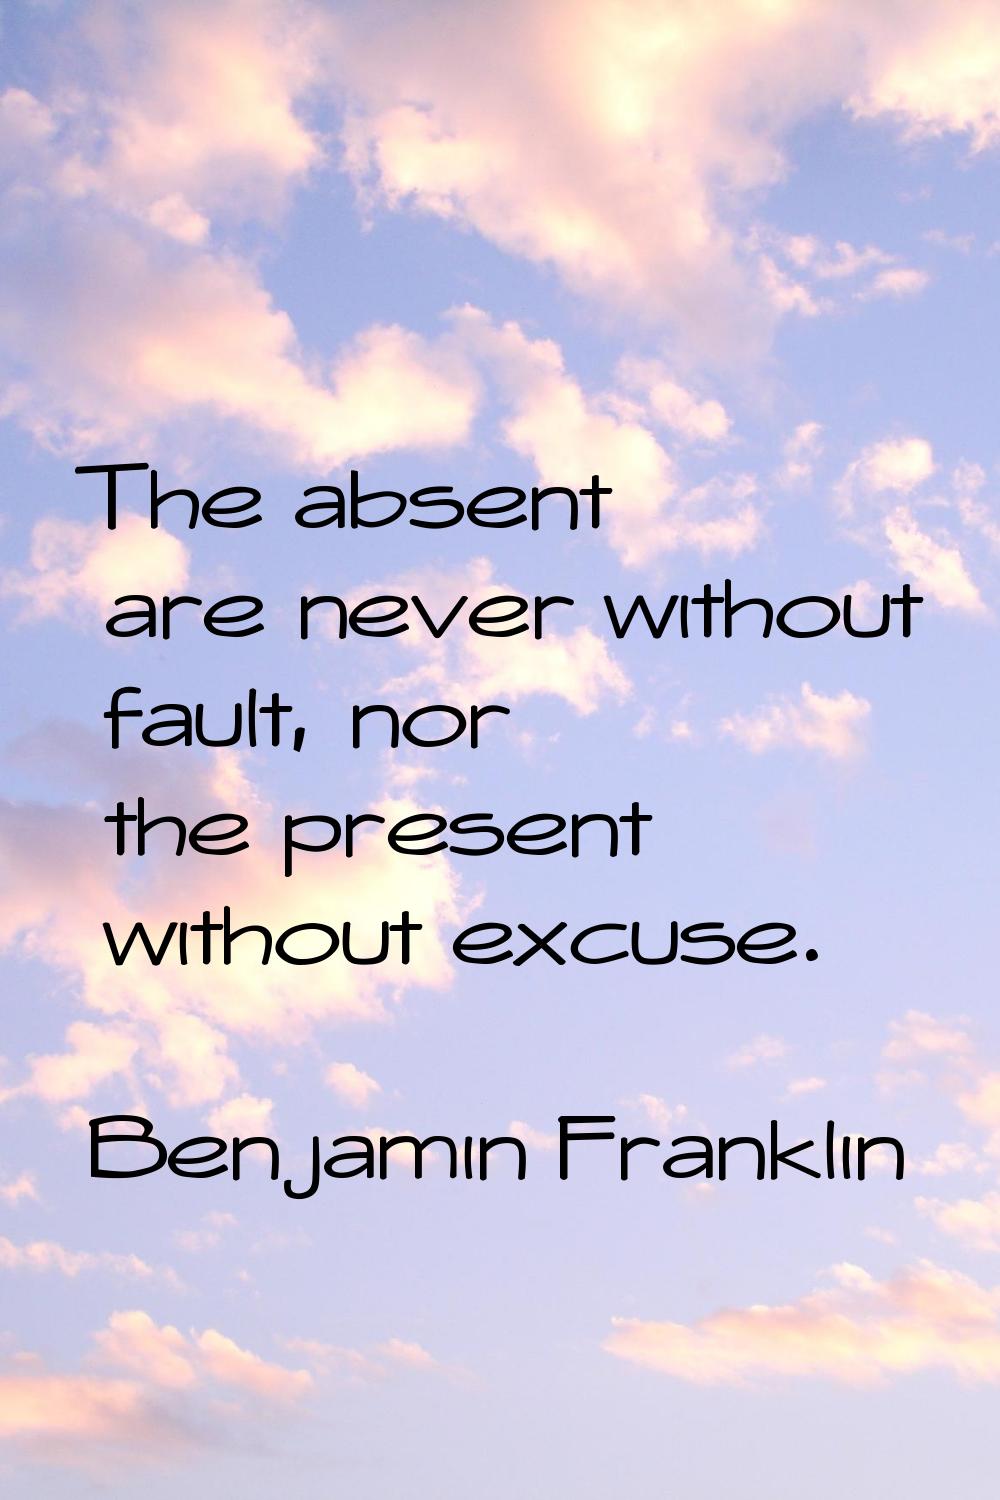 The absent are never without fault, nor the present without excuse.